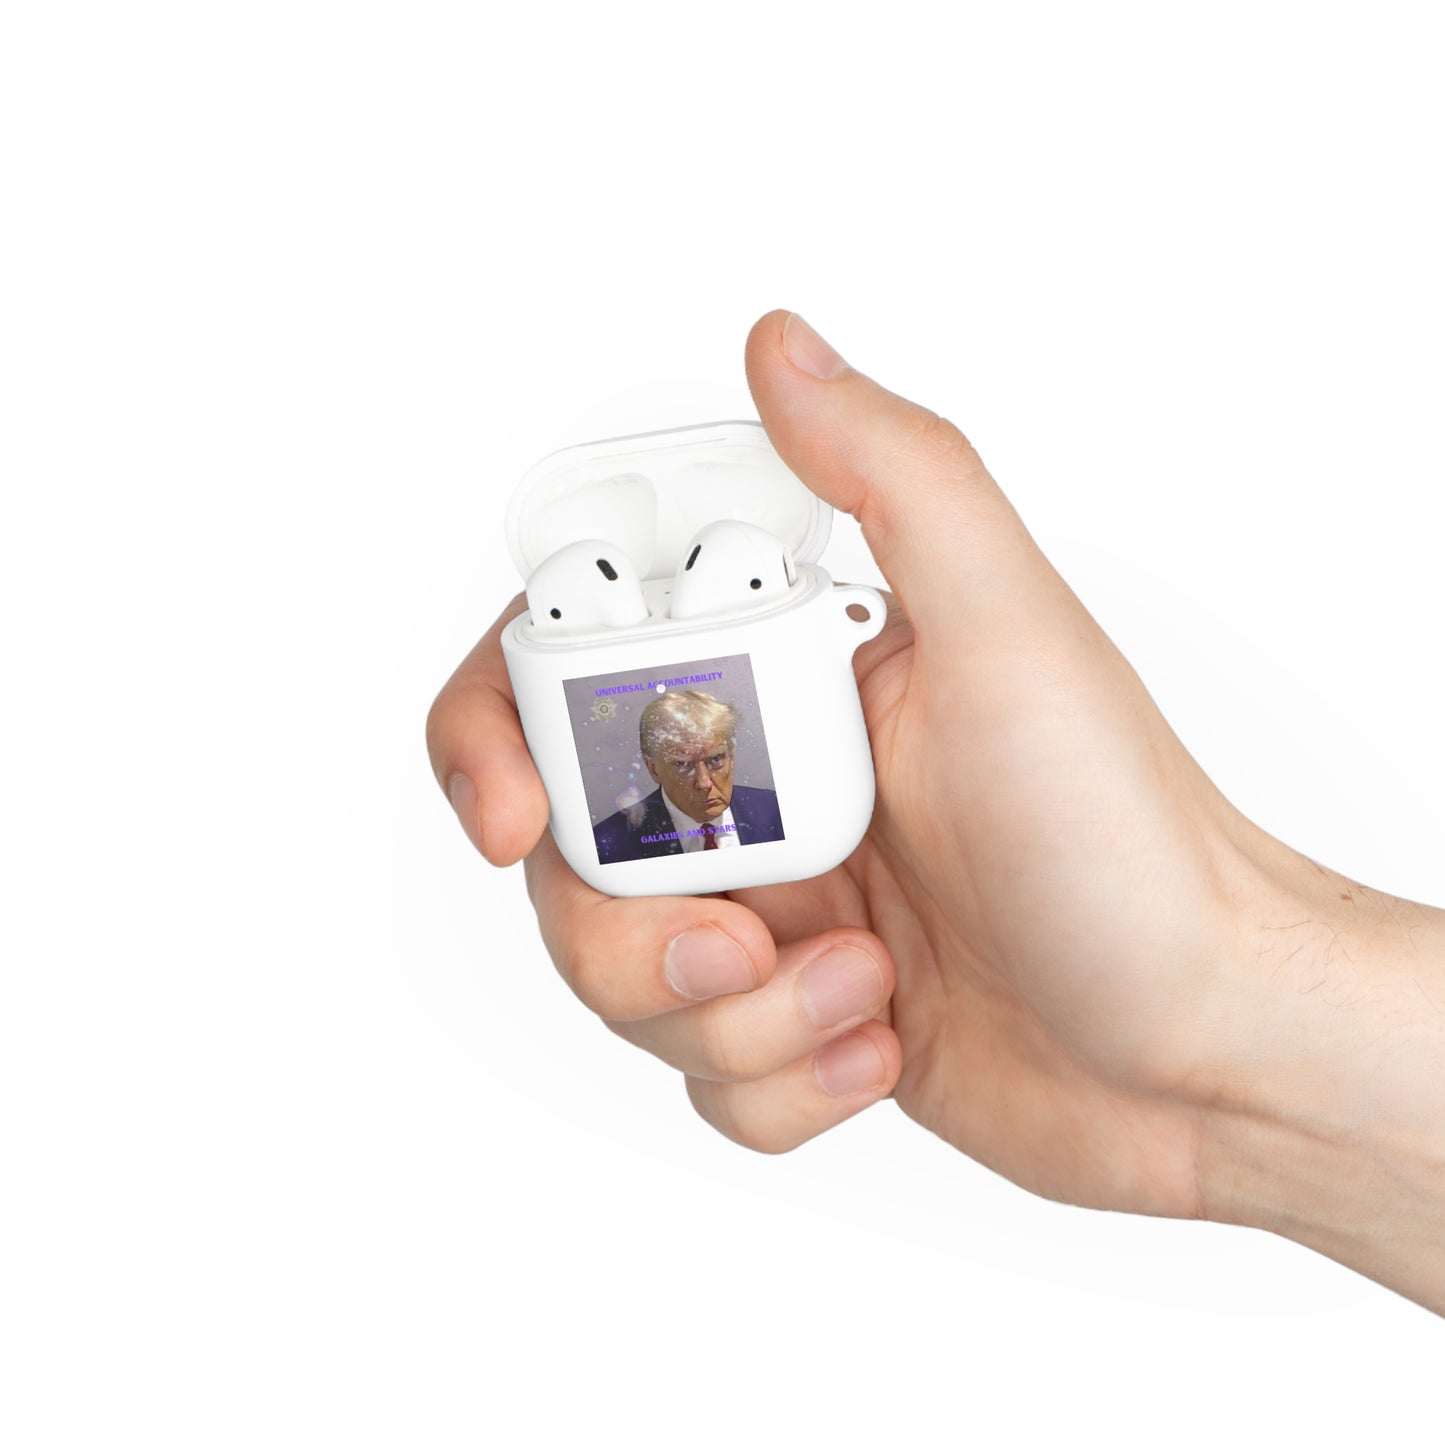 Donald J Trump Cosmic Justice AirPods Case: 91 Counts Charged - Universal Accountability Accessory